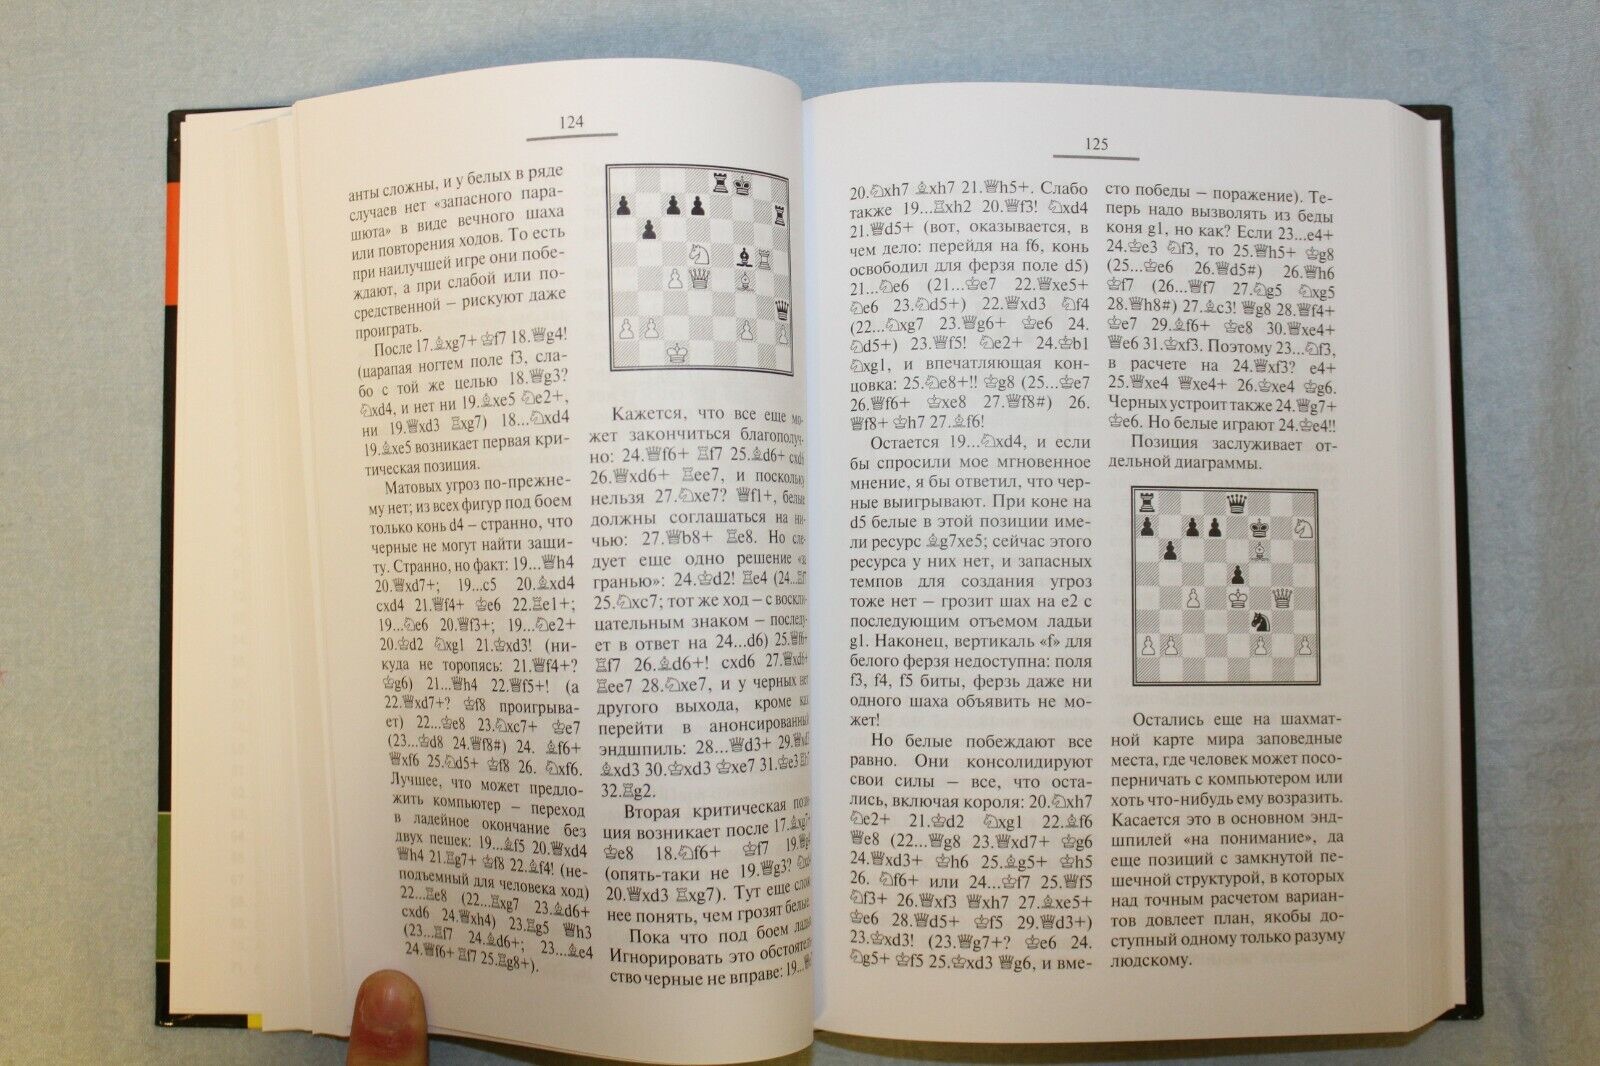 11535.Russian Chess Book: Odessky. Debut Winning. Questions of non-modern chess theory